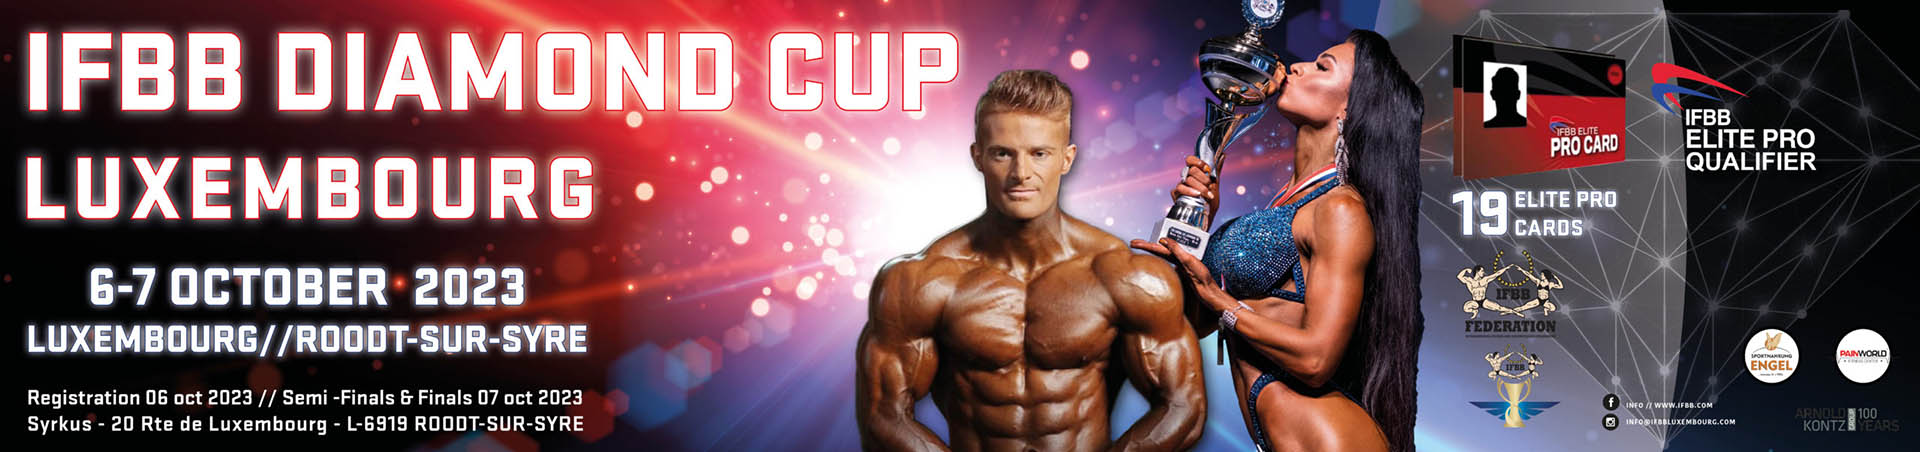 IFBB DIAMOND CUP LUXEMBOURG IFBB DIAMOND CUP LUXEMBOURG